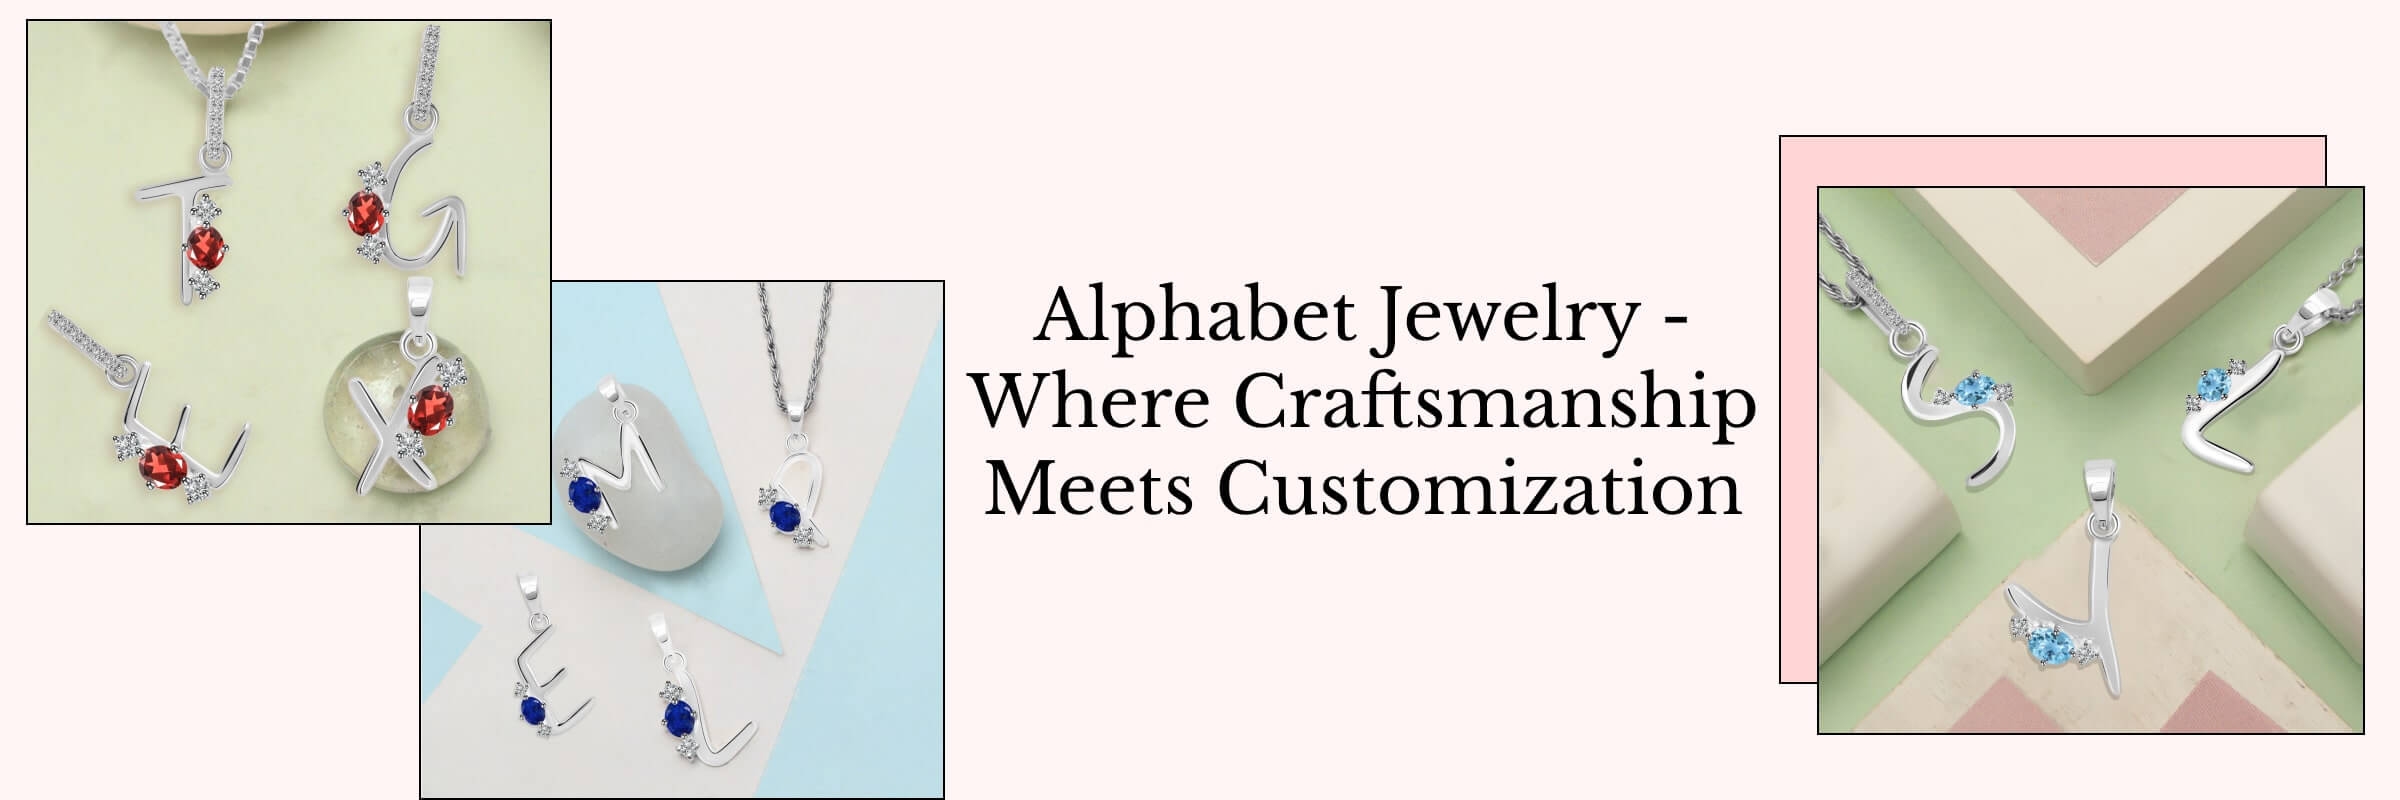 A Deep Dive into Creation and Craftsmanship of Customized Alphabet Jewelry